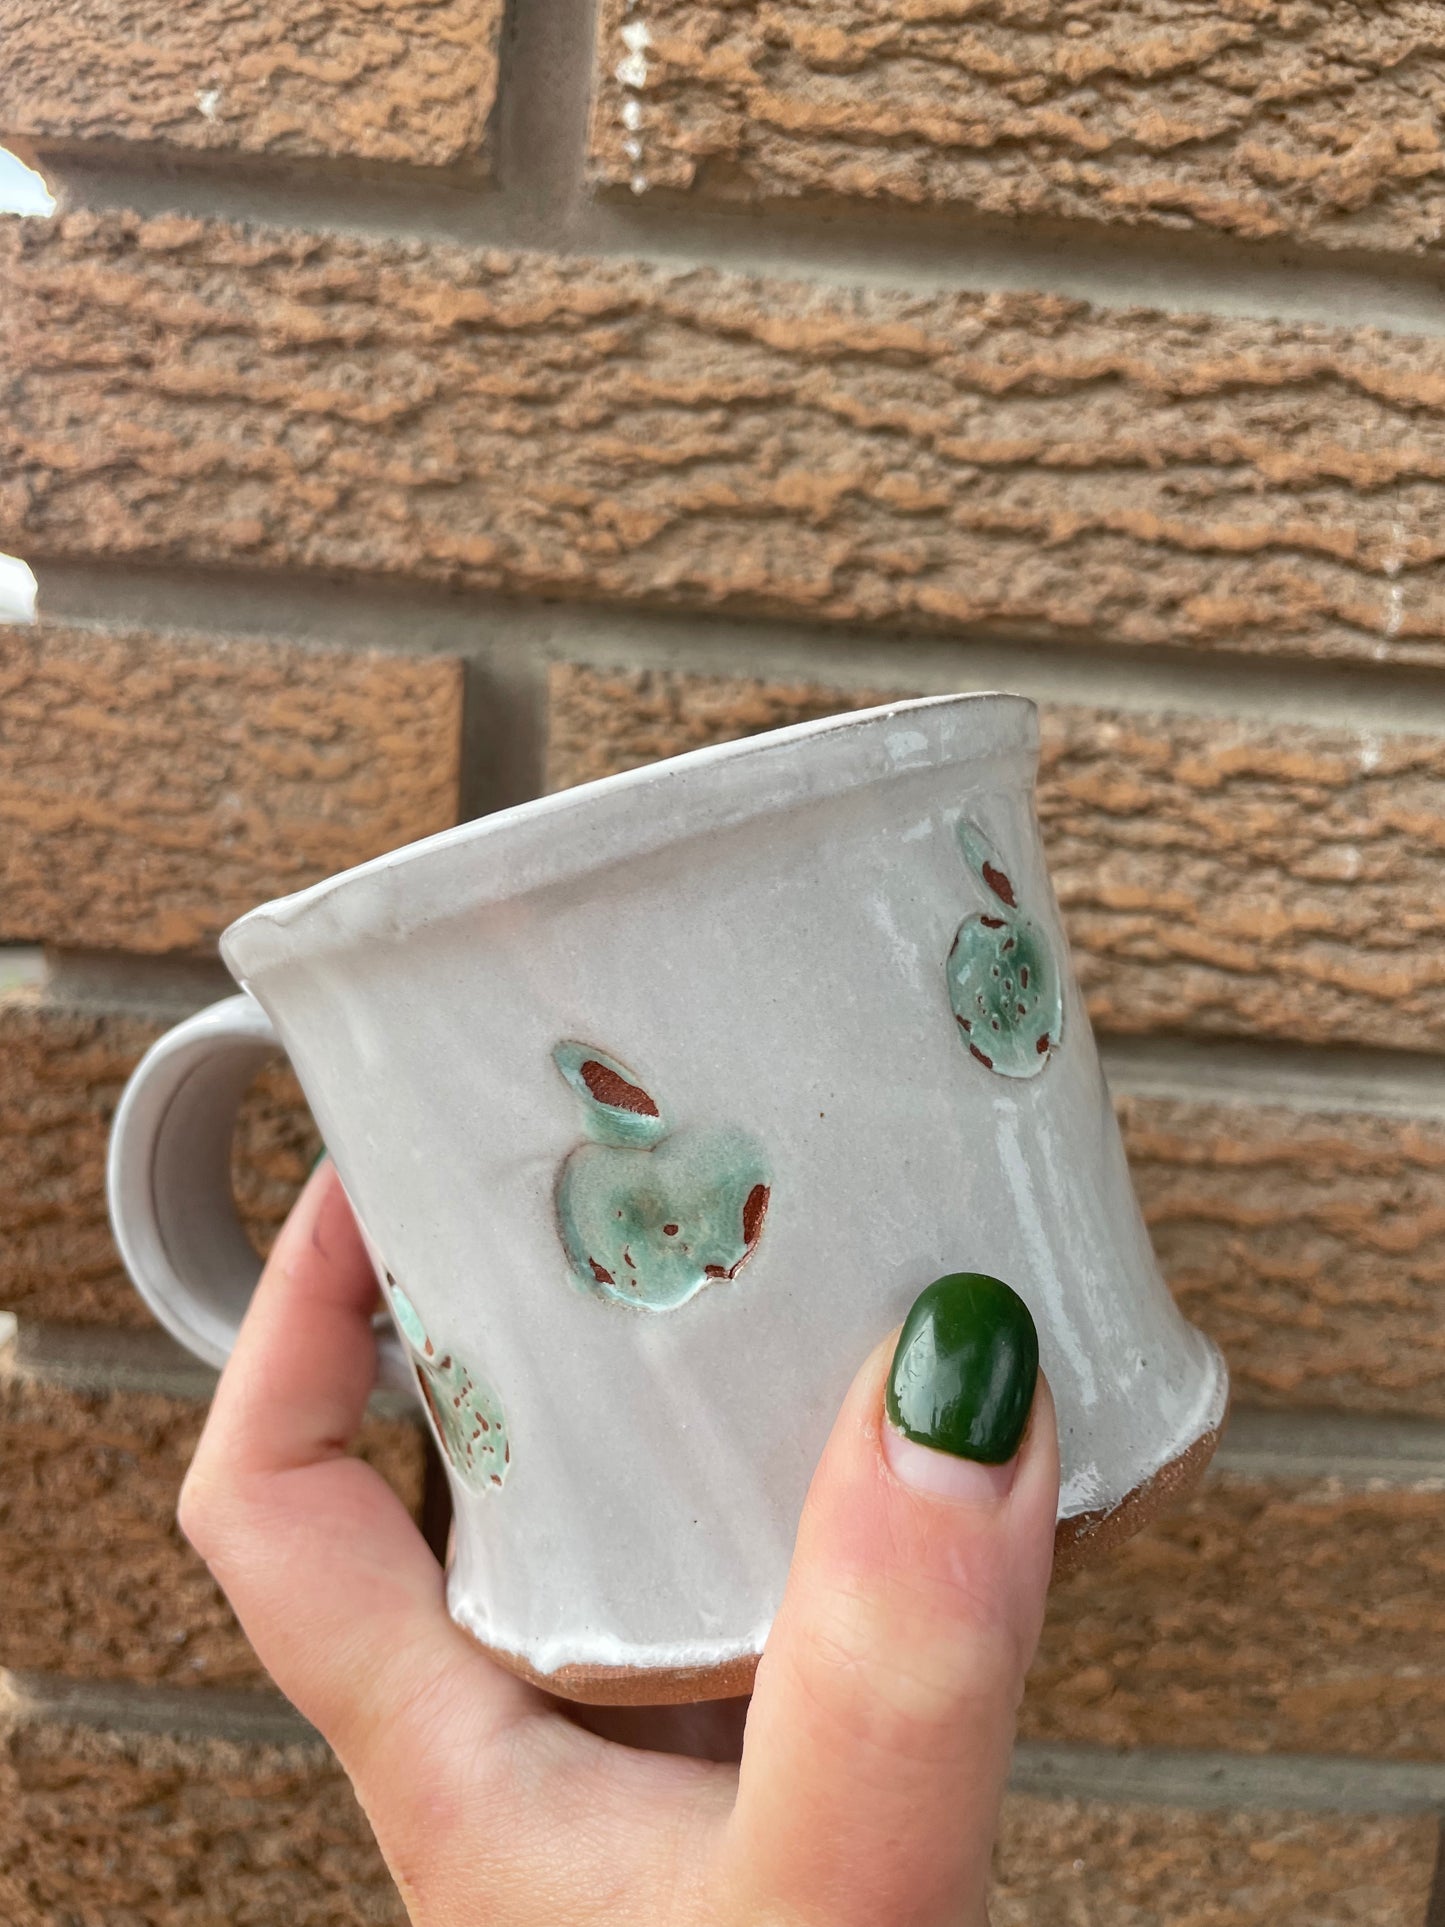 Apple Mugs Cups by Cathy Lombard